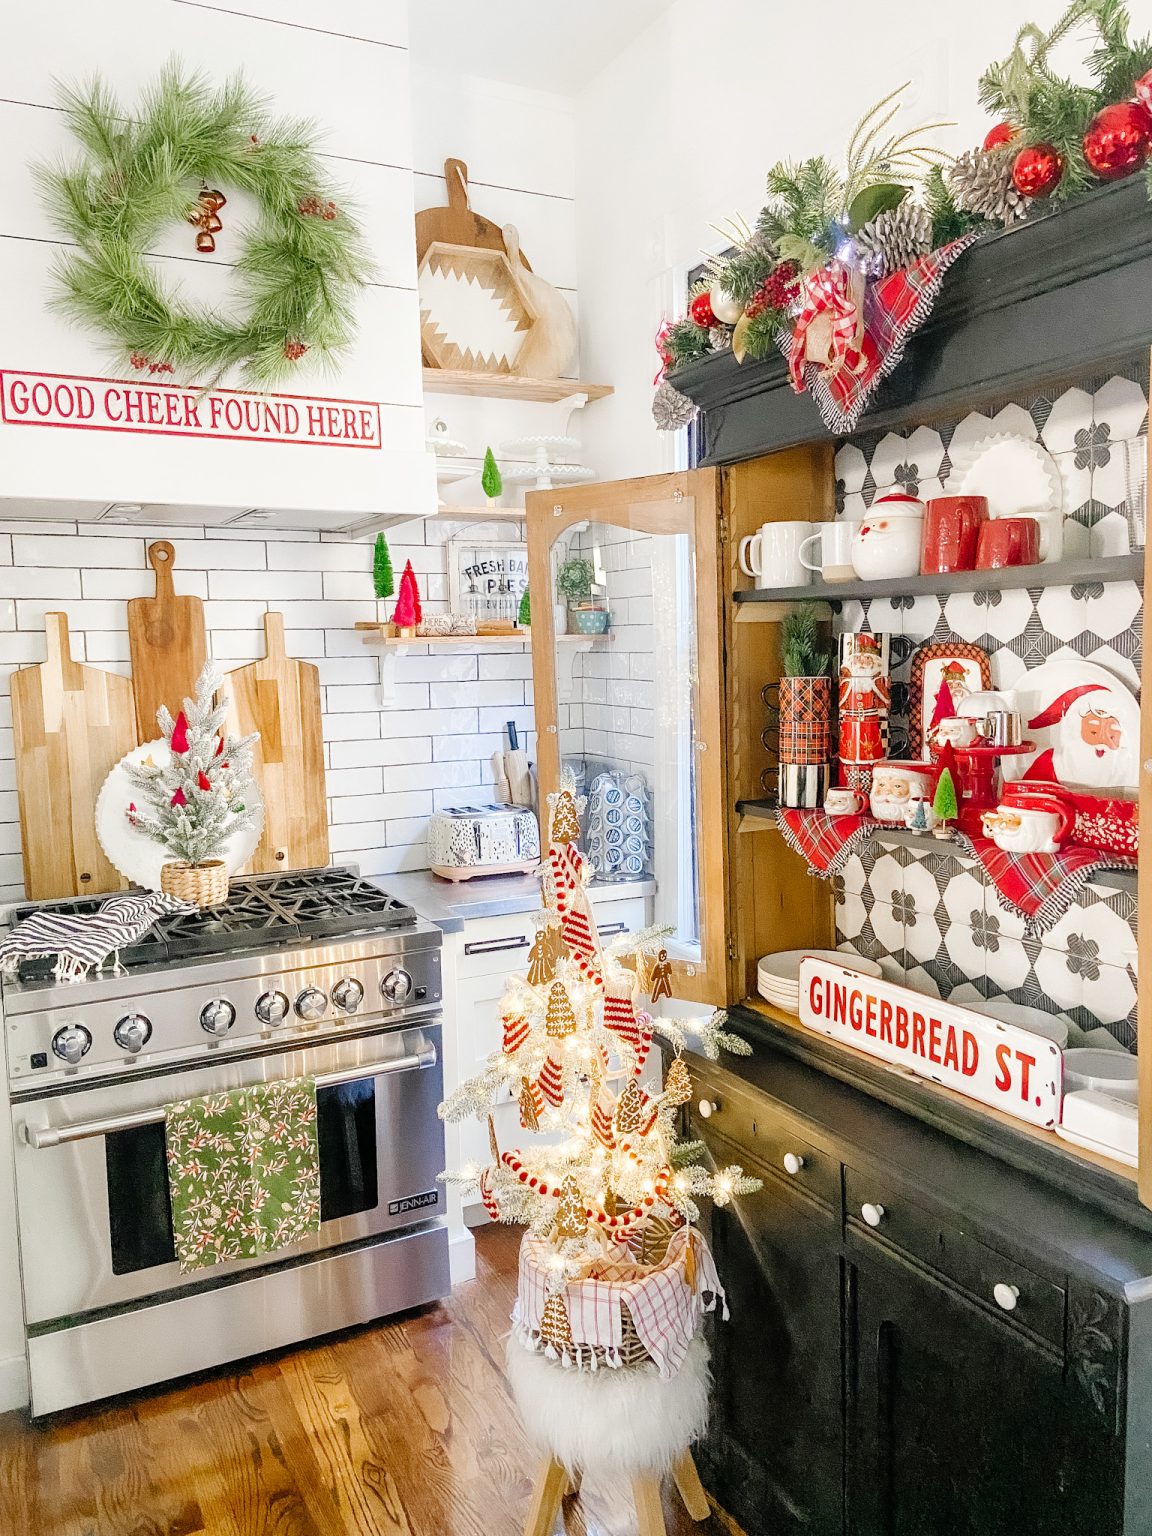 Gingerbread Men Tabletop Holiday Tree - perfect for your kitchen!